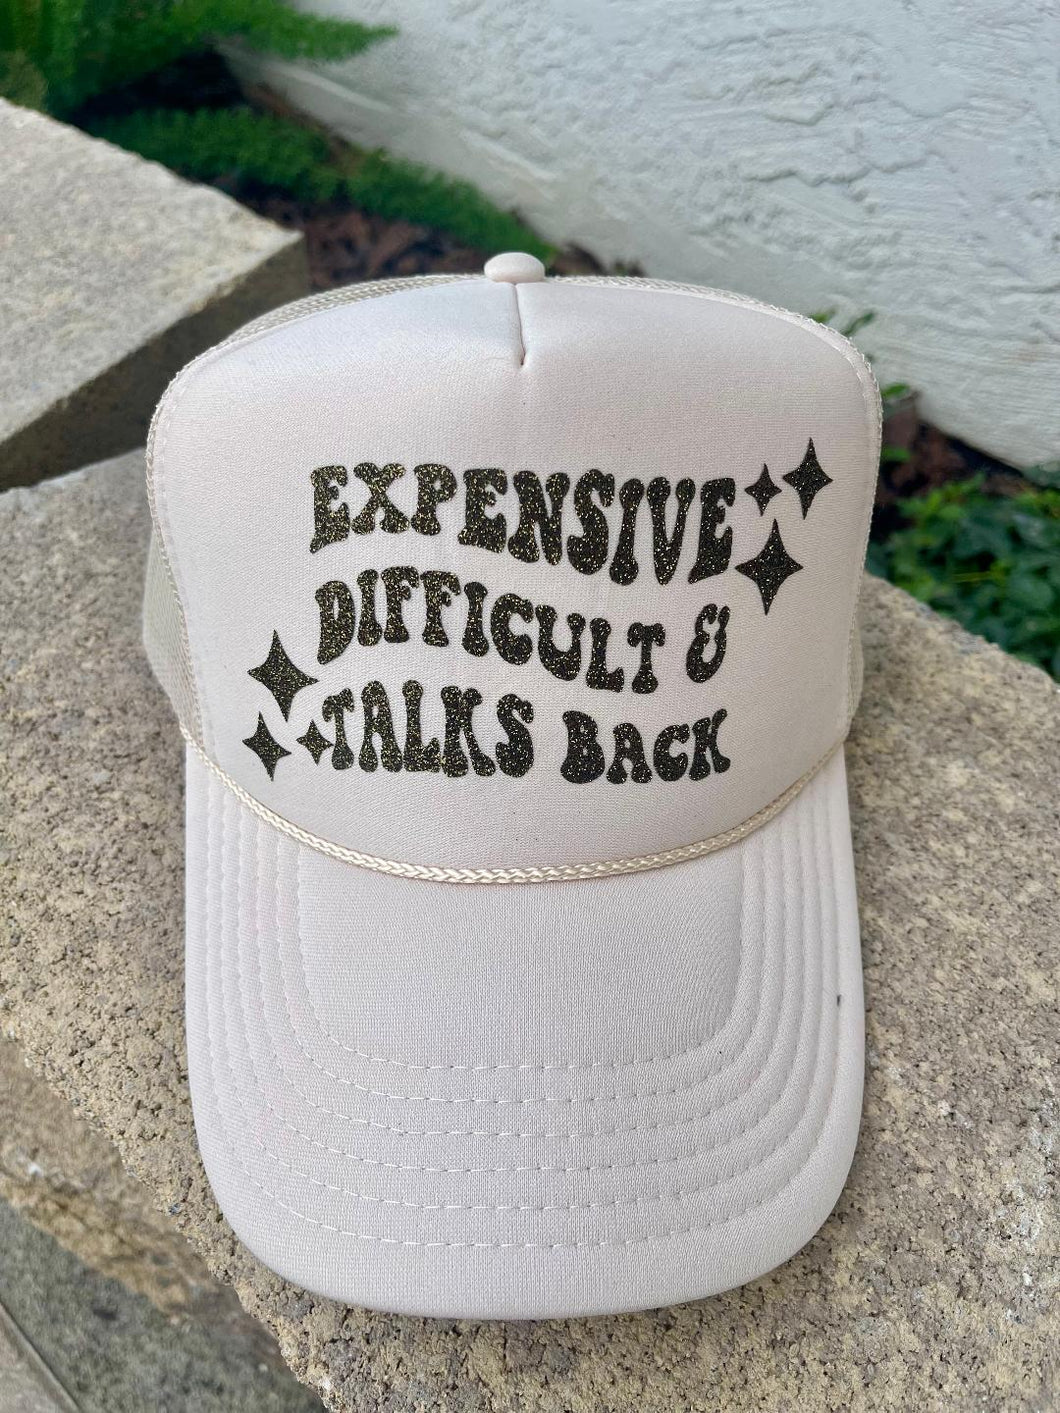 Expensive Difficult & Talks Back Graphic Trucker Hat